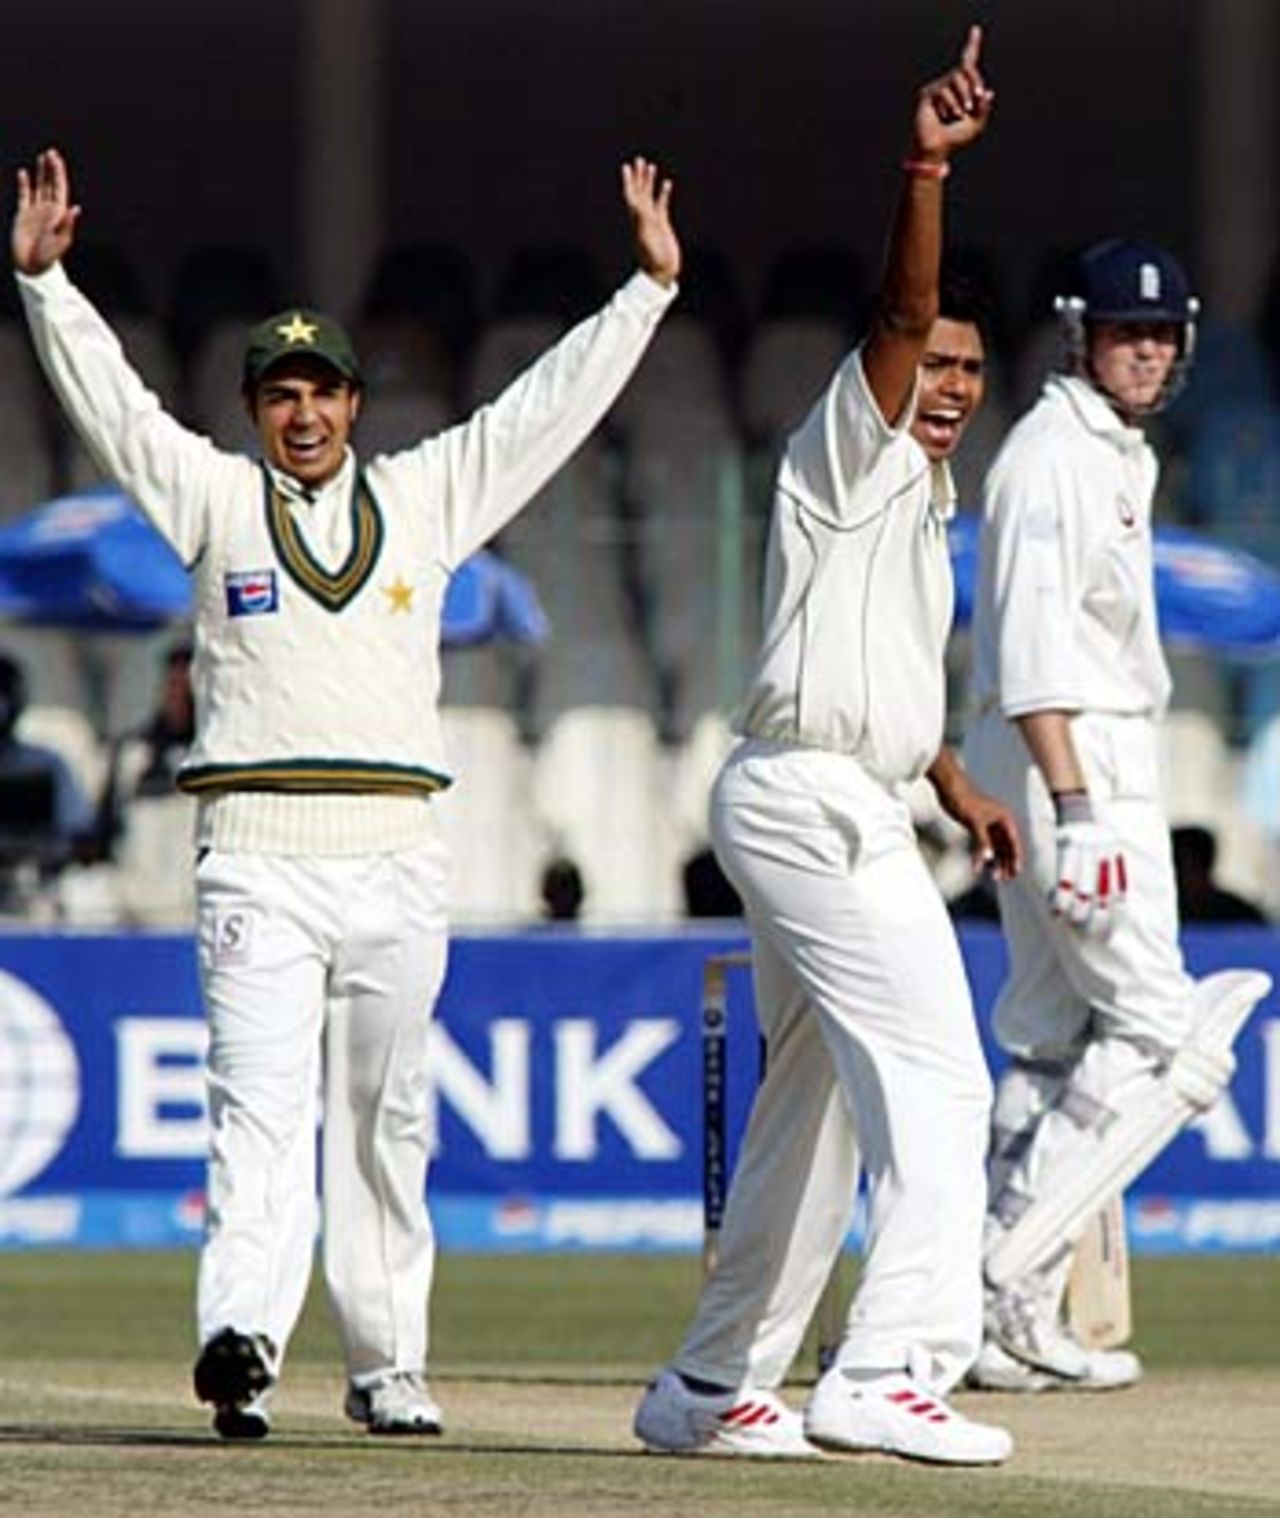 Danish Kaneria dismisses Shaun Udal with the fourth ball of the day, Pakistan v England, 3rd Test, Lahore, November 30, 2005